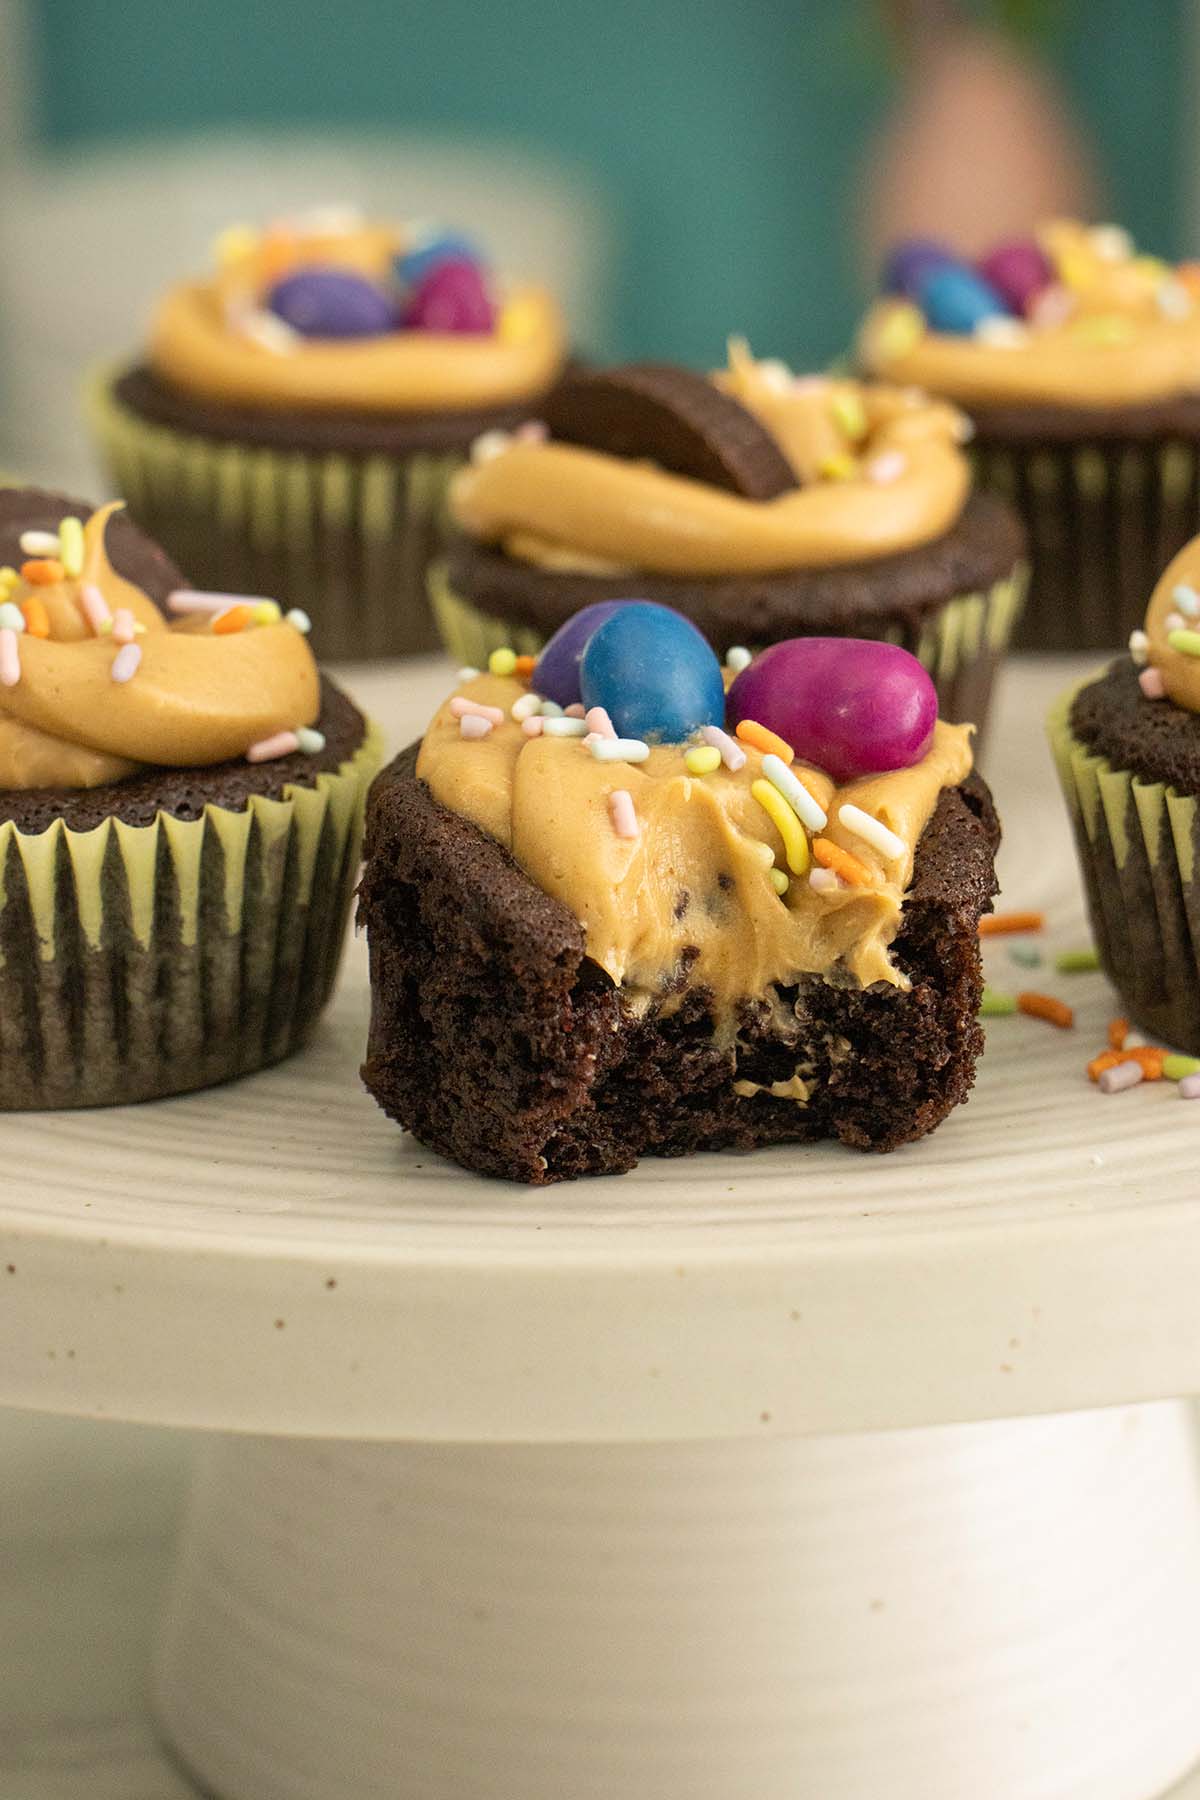 close-up of a peanut butter cupcake with a bite taken out